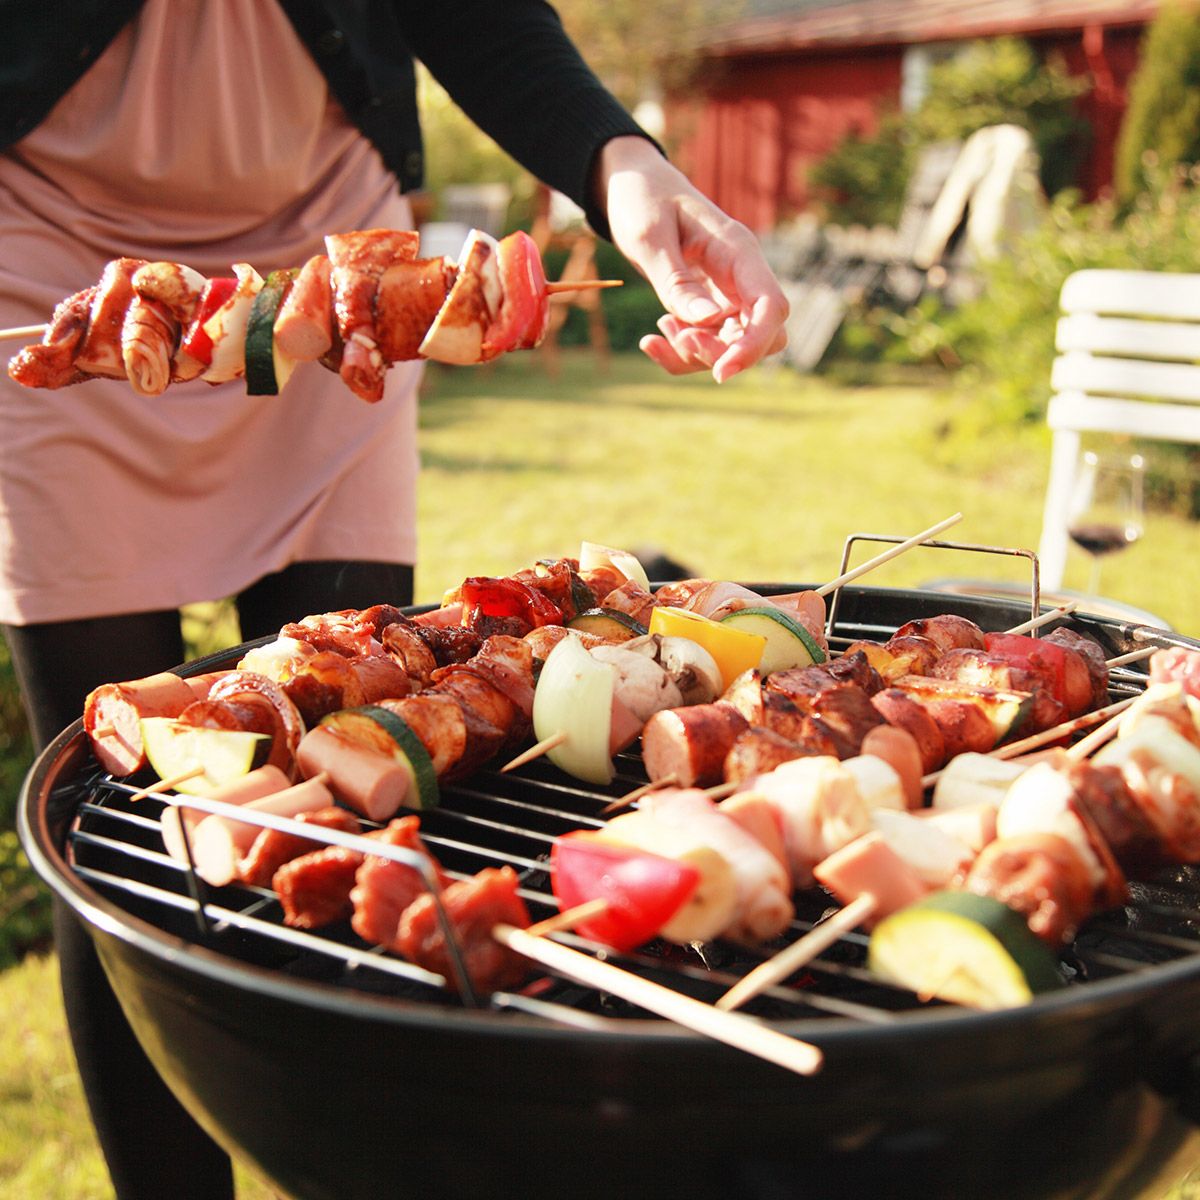 Food, Cuisine, Finger food, Brochette, Skewer, Roasting, Cooking, Dish, Recipe, Barbecue grill, 